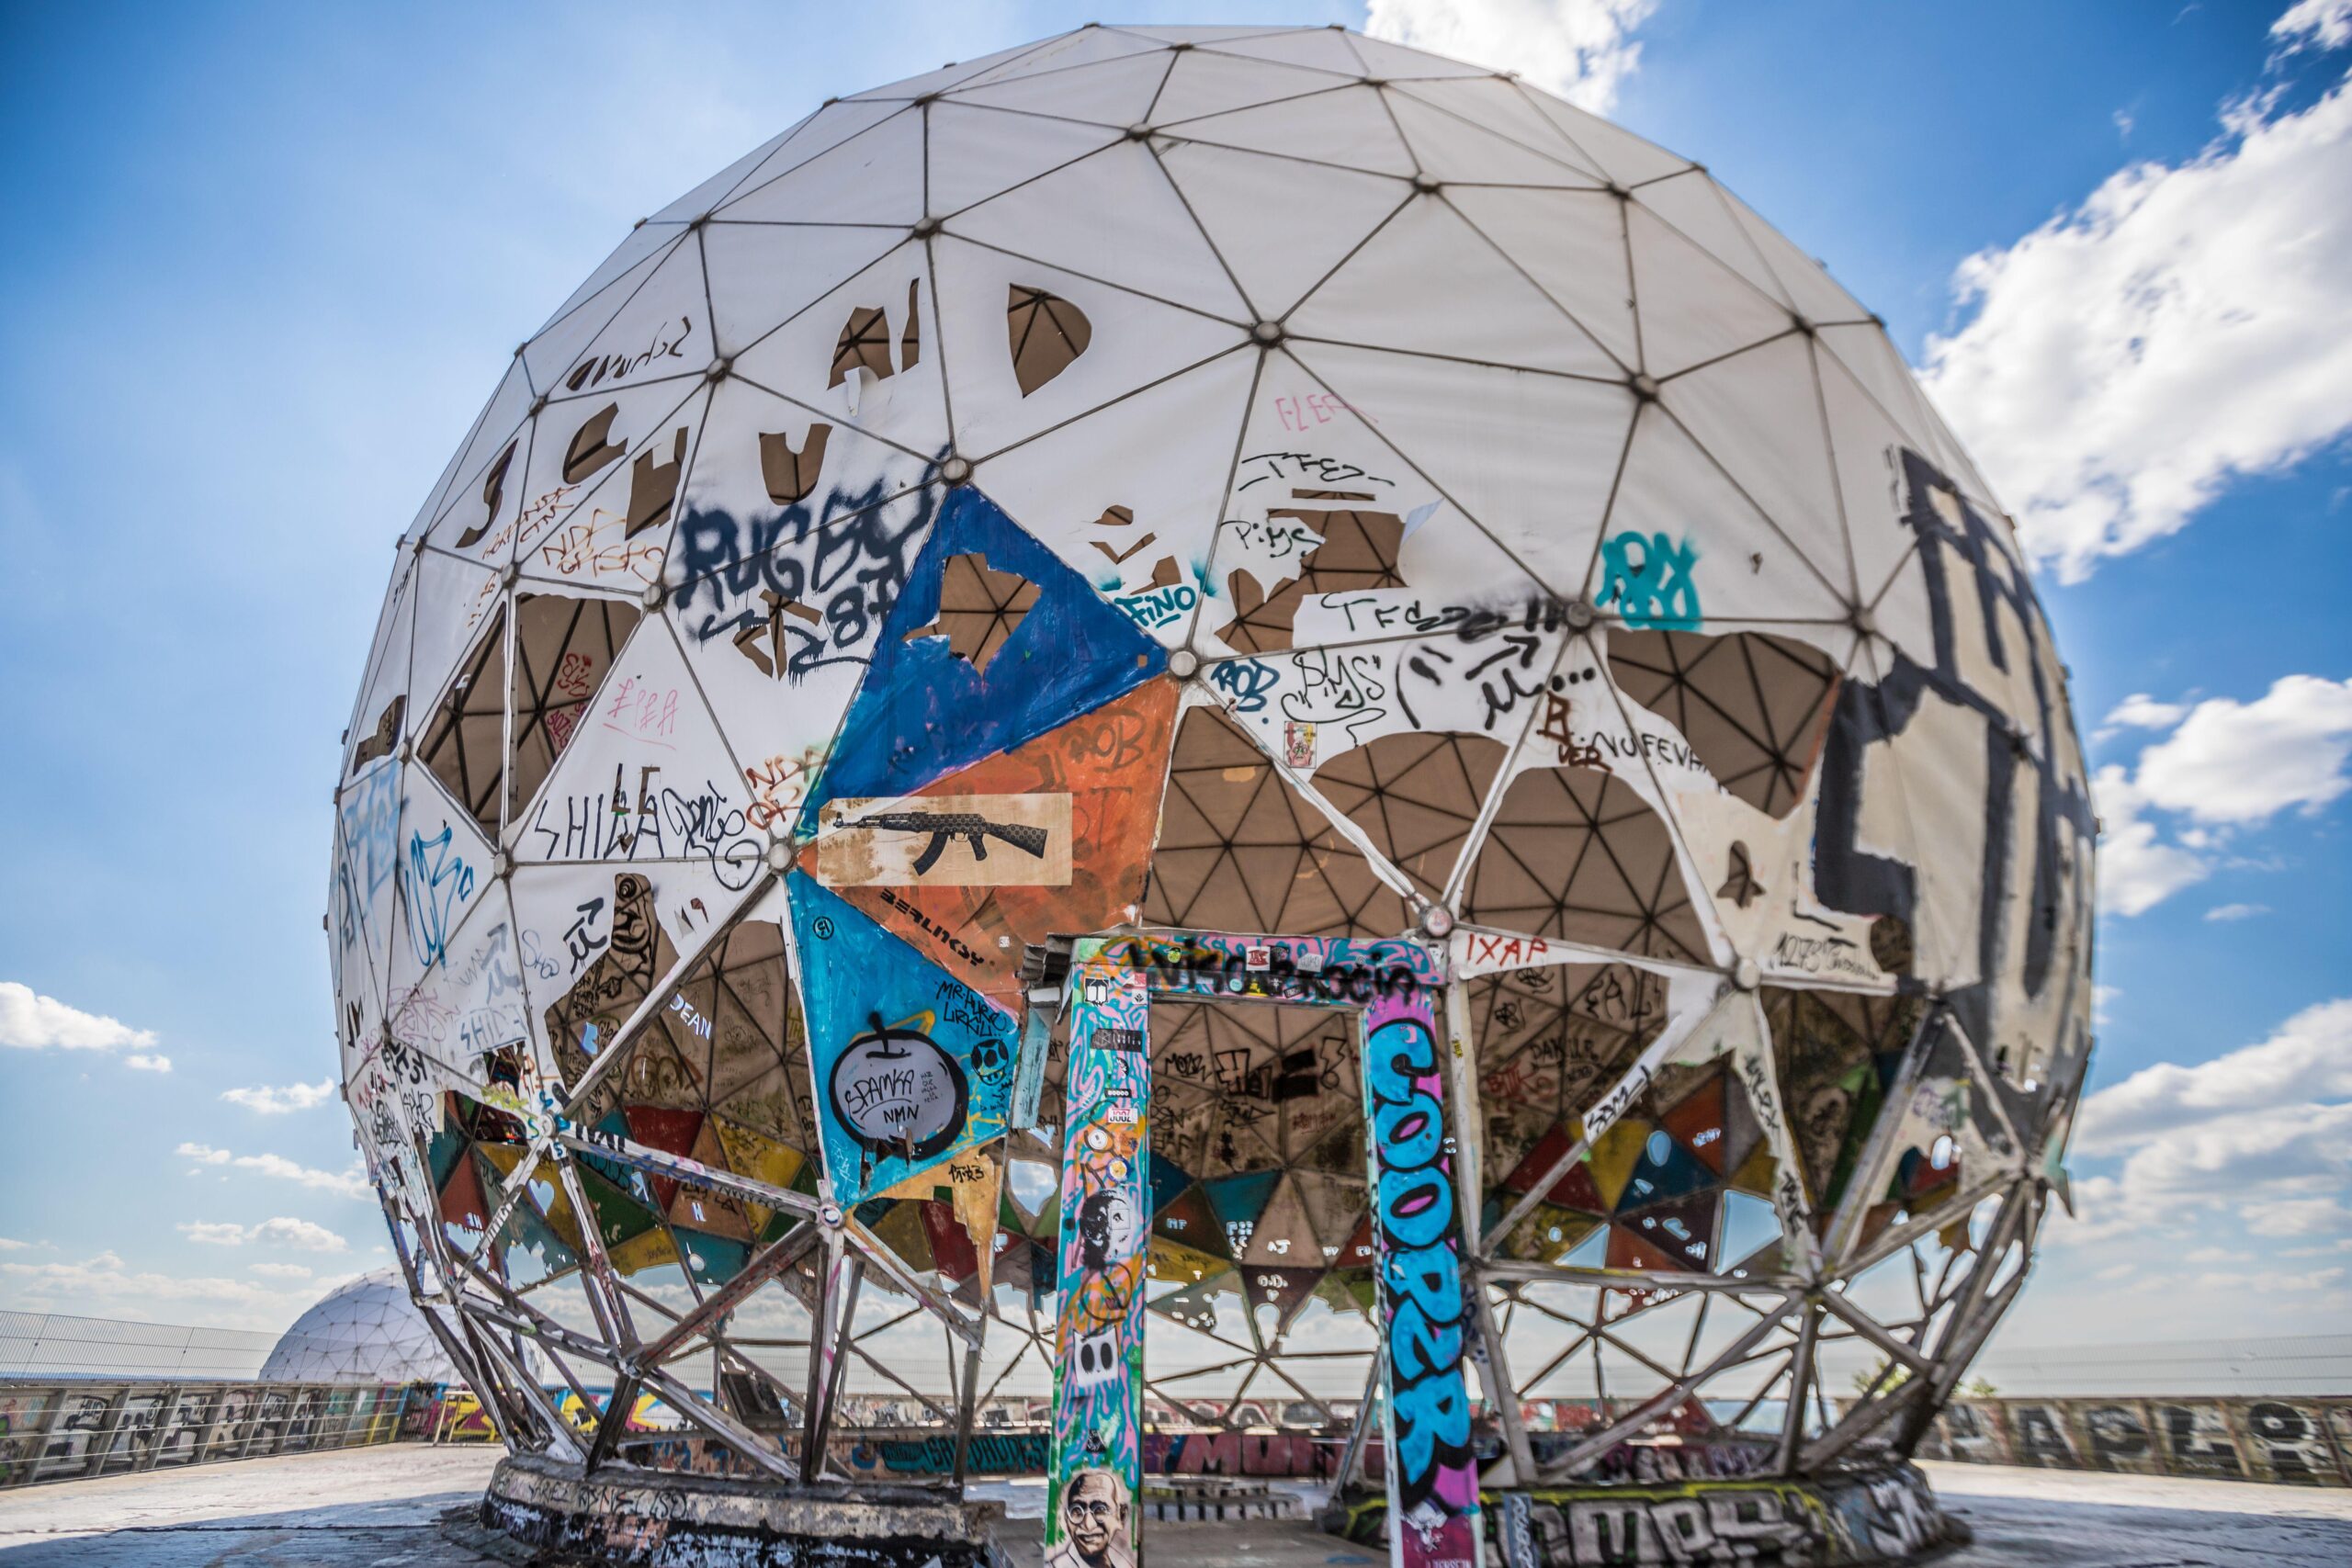 The iconic 'Berlin balls' were left to rot but have been given a splash of colour by street artists